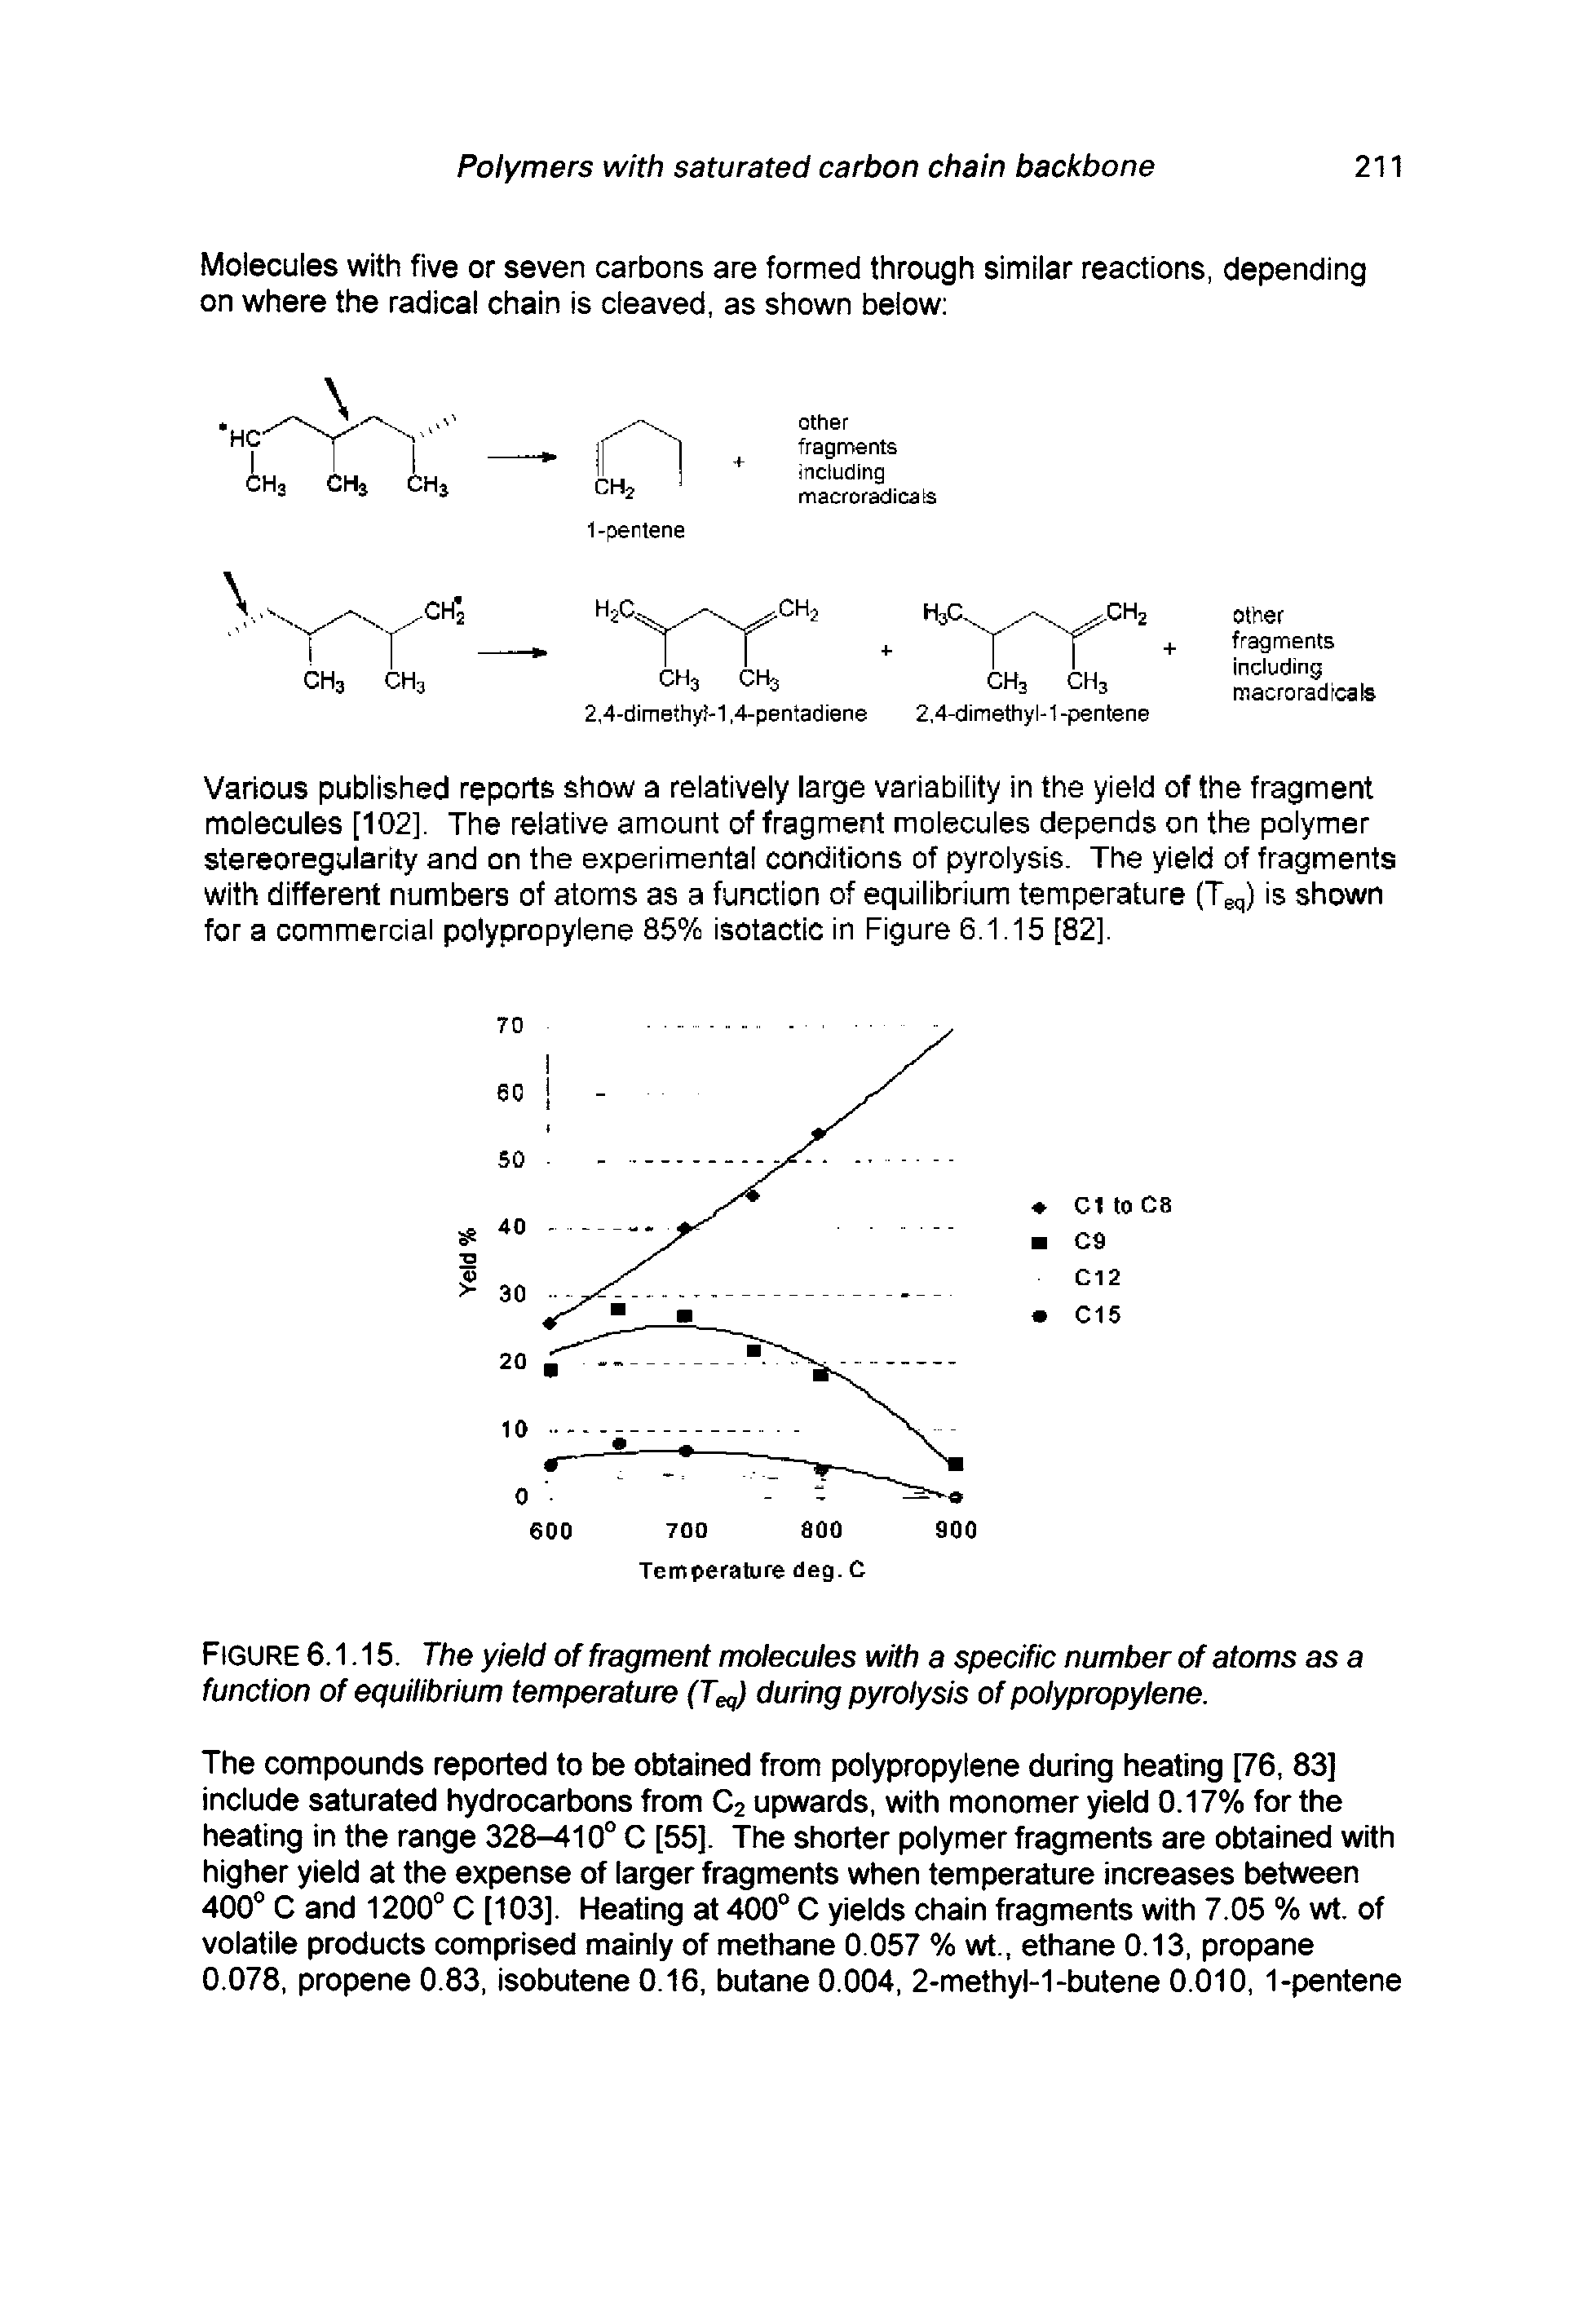 Figure 6.1.15. The yield of fragment molecules with a specific number of atoms as a function of equilibrium temperature (Teq) during pyrolysis of polypropylene.